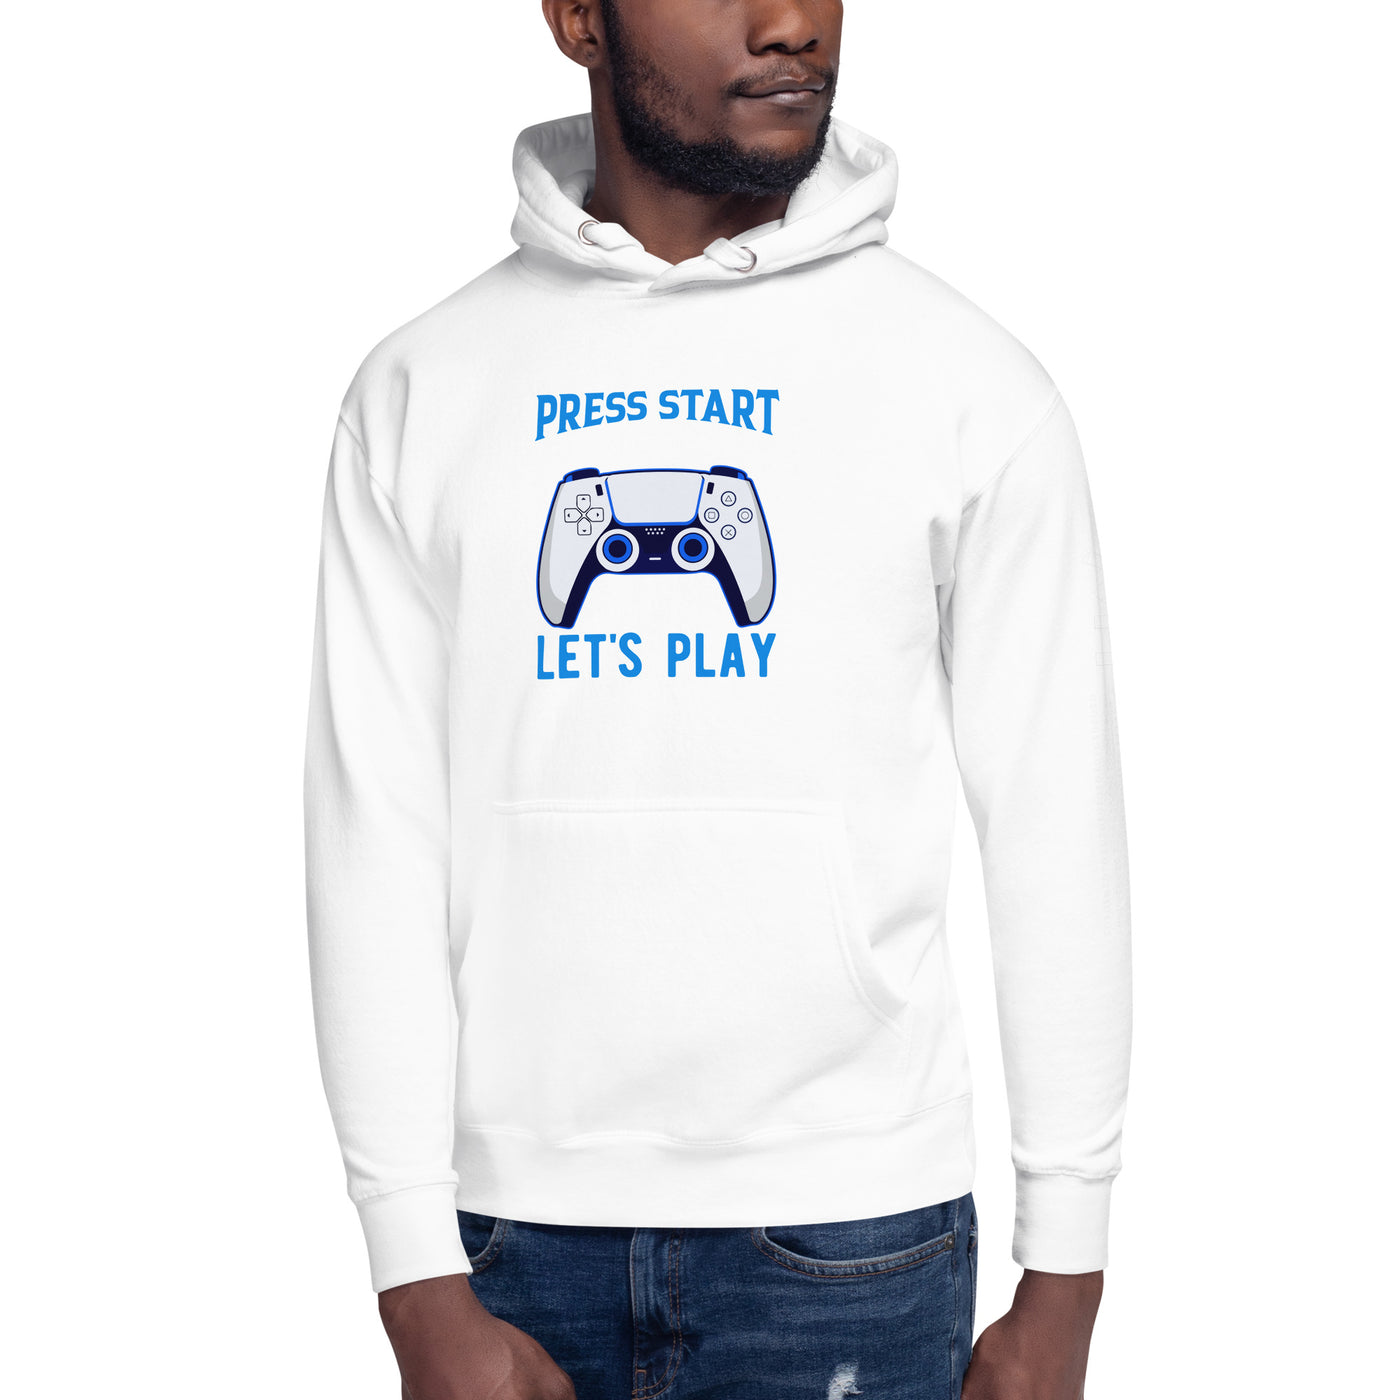 Press Start and Have some Fun - Unisex Hoodie